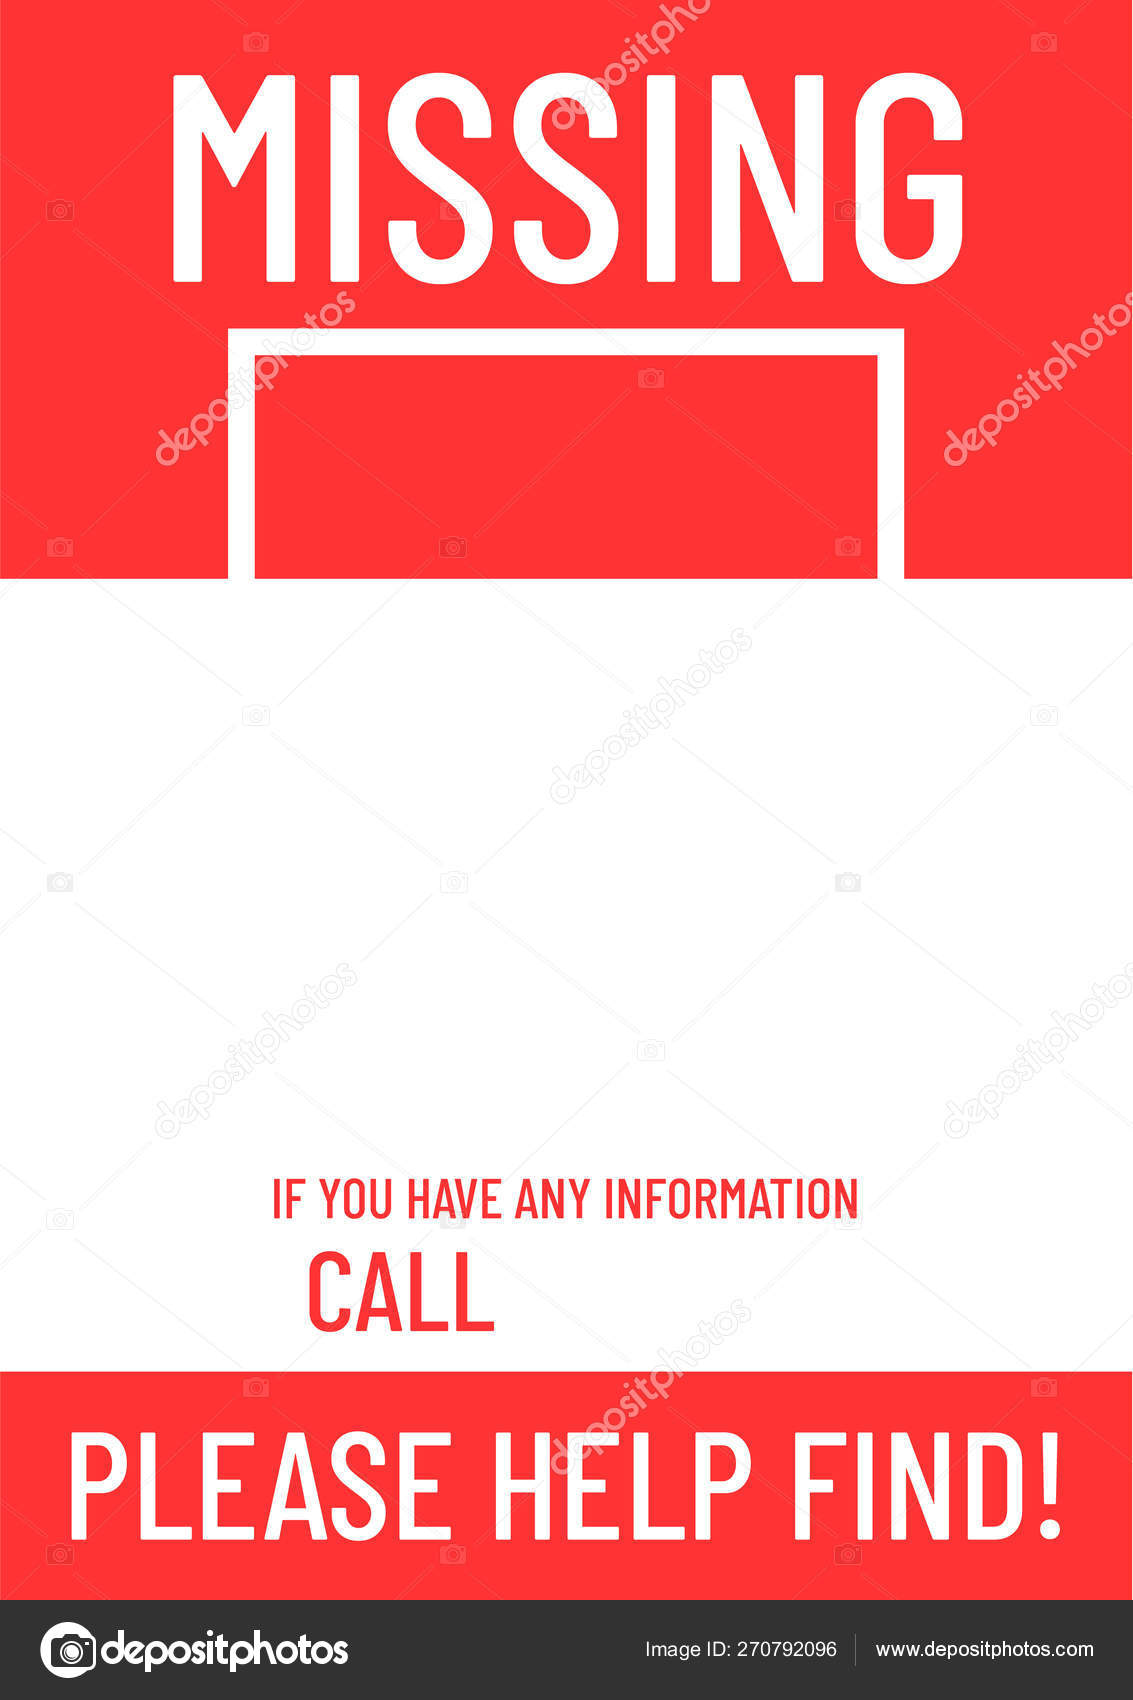 blank-missing-poster-template-ready-to-print-stock-vector-image-by